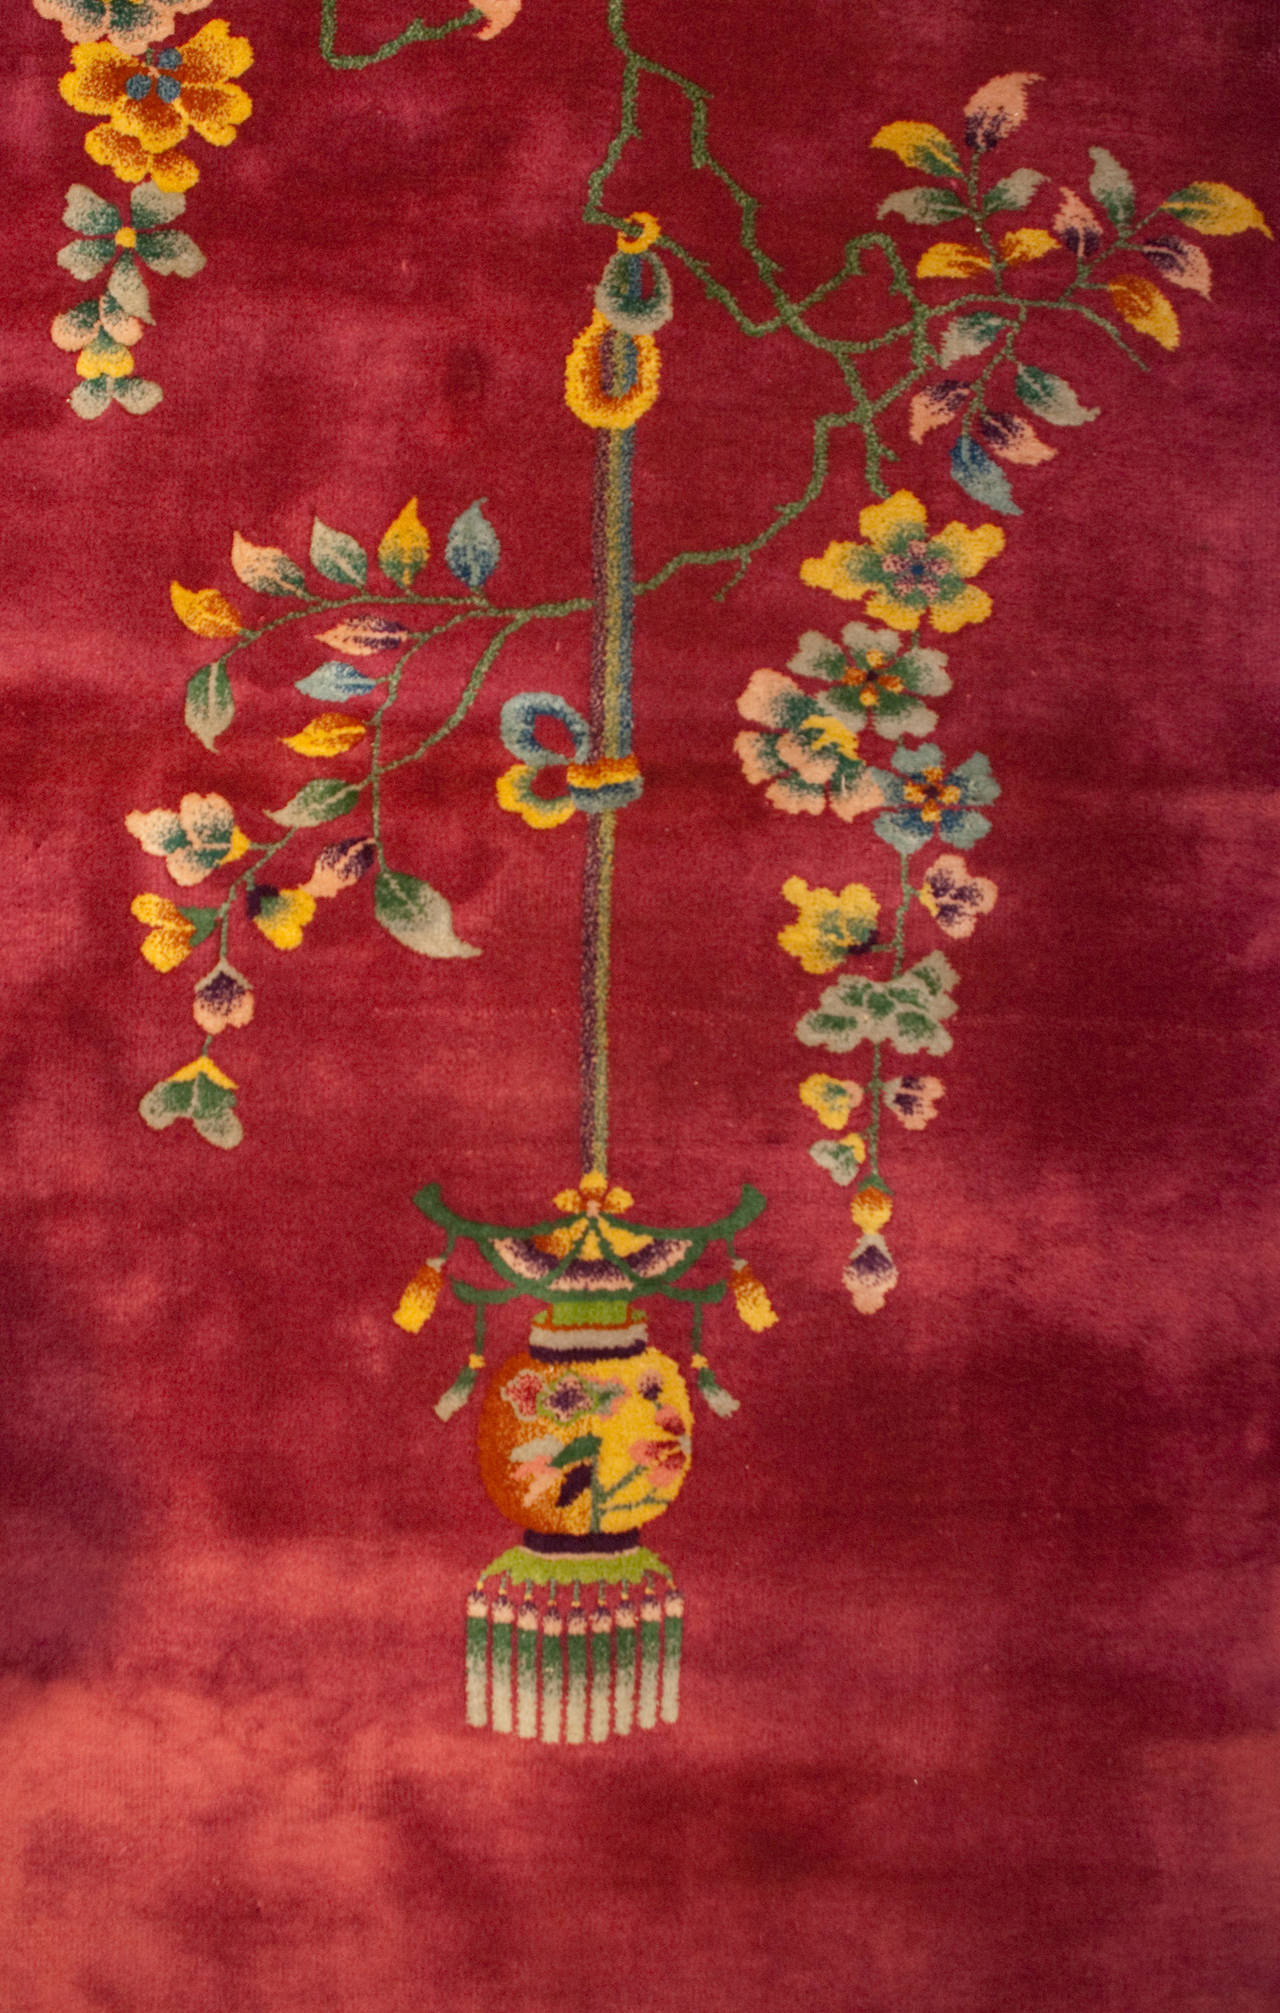 An early 20th century Chinese Art Deco rug with a brilliant borderless cranberry field and an asymmetrical motif of multicolored flowers, and a flowering tree branch with a hanging lantern.